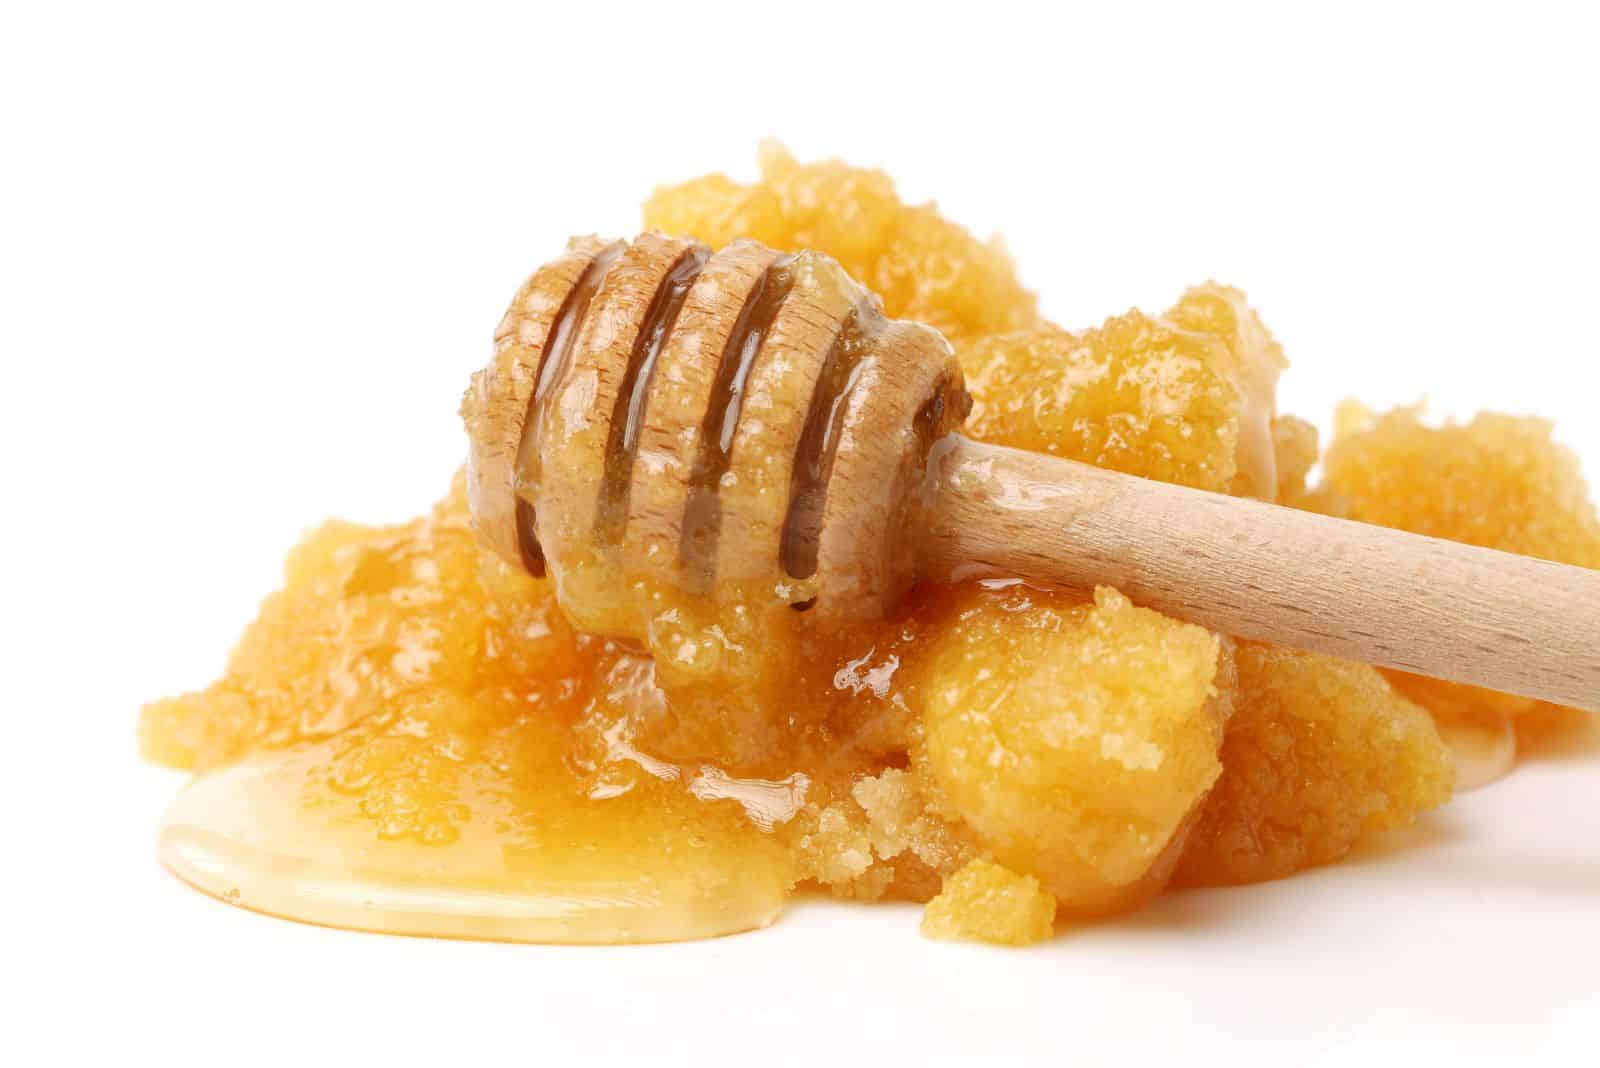 crystallized honey with a wooden spoon